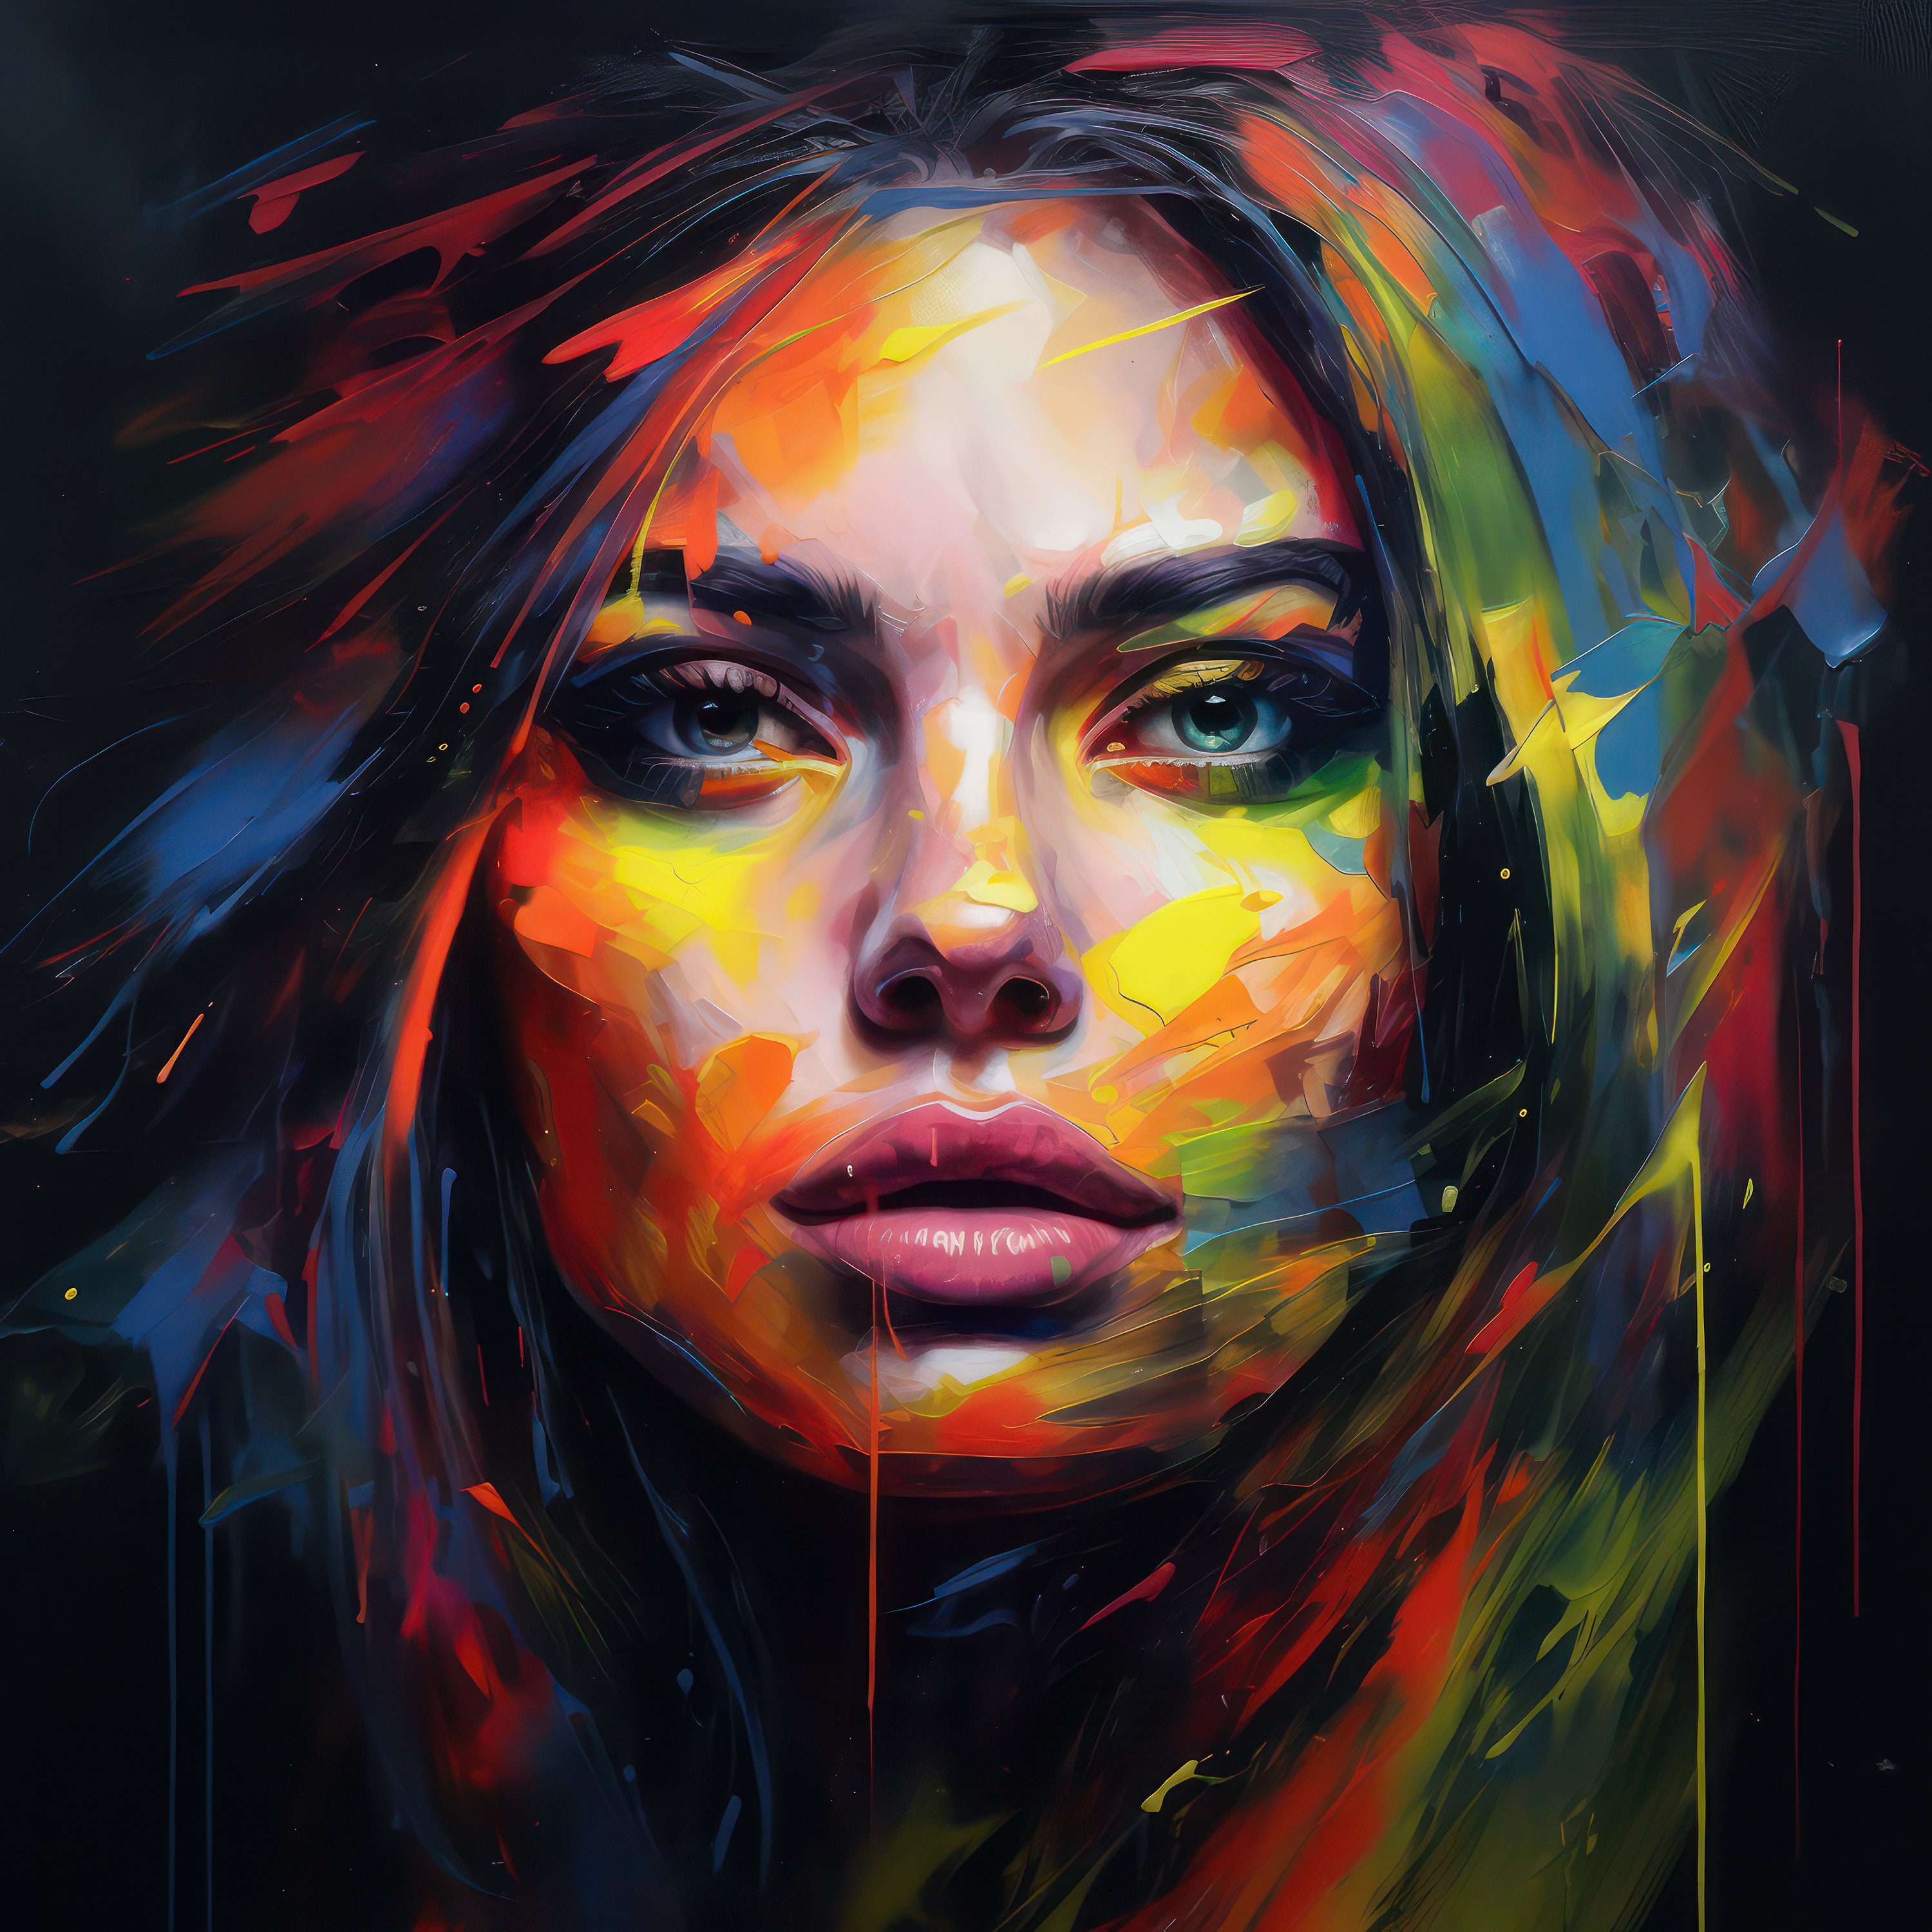 Colorful Woman Portrait Wall Art Print Abstract Girl Poster Home Decor ...